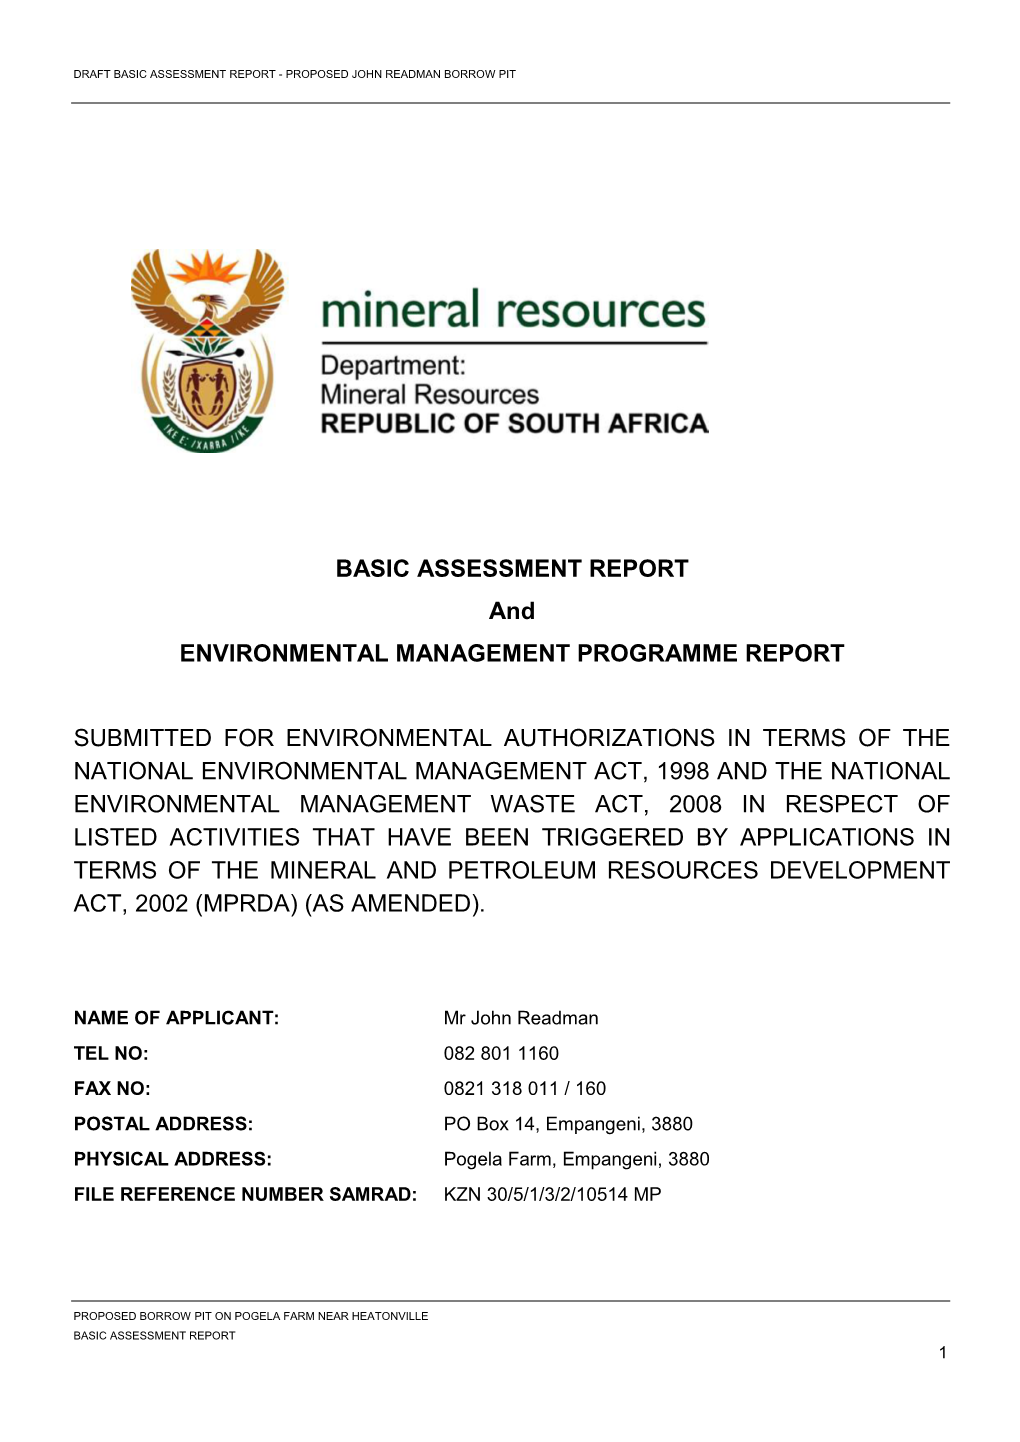 BASIC ASSESSMENT REPORT and ENVIRONMENTAL MANAGEMENT PROGRAMME REPORT